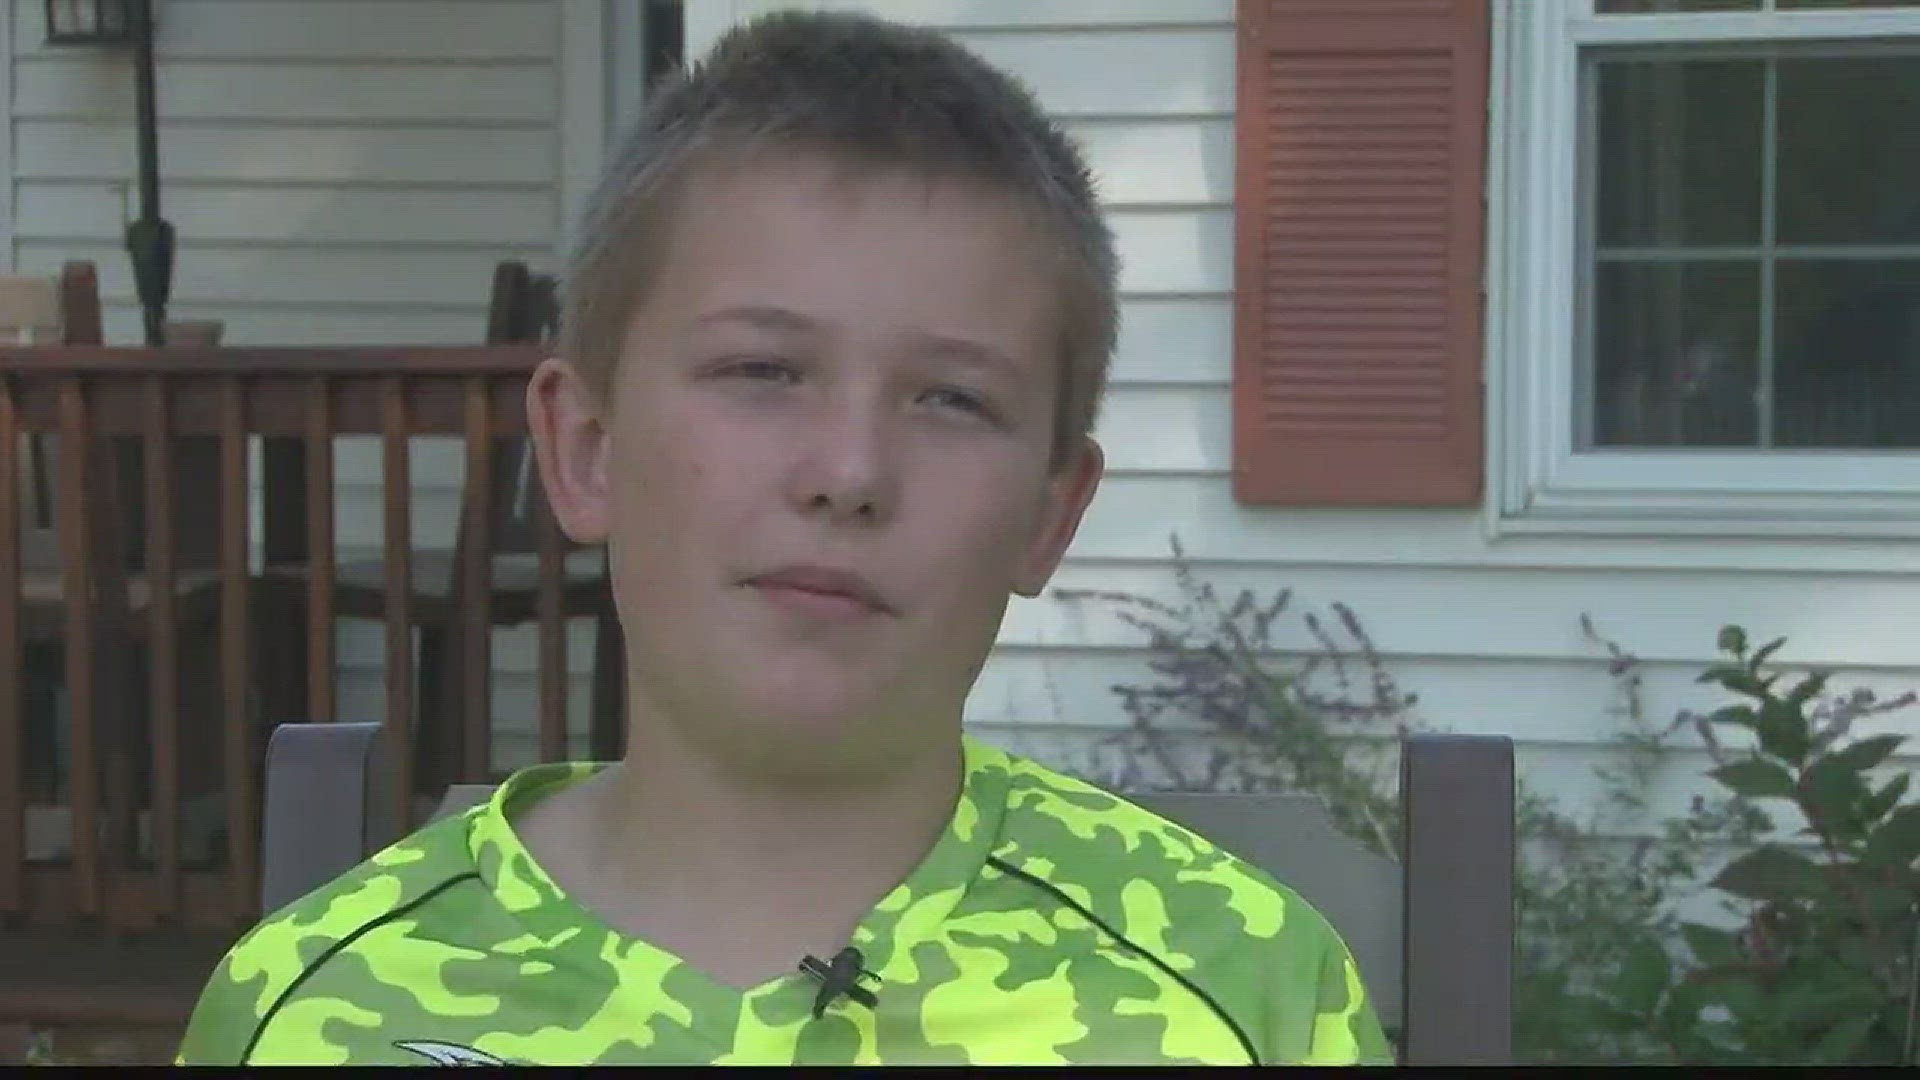 WNY's Great Kids: Boy Scout Performs First Aid